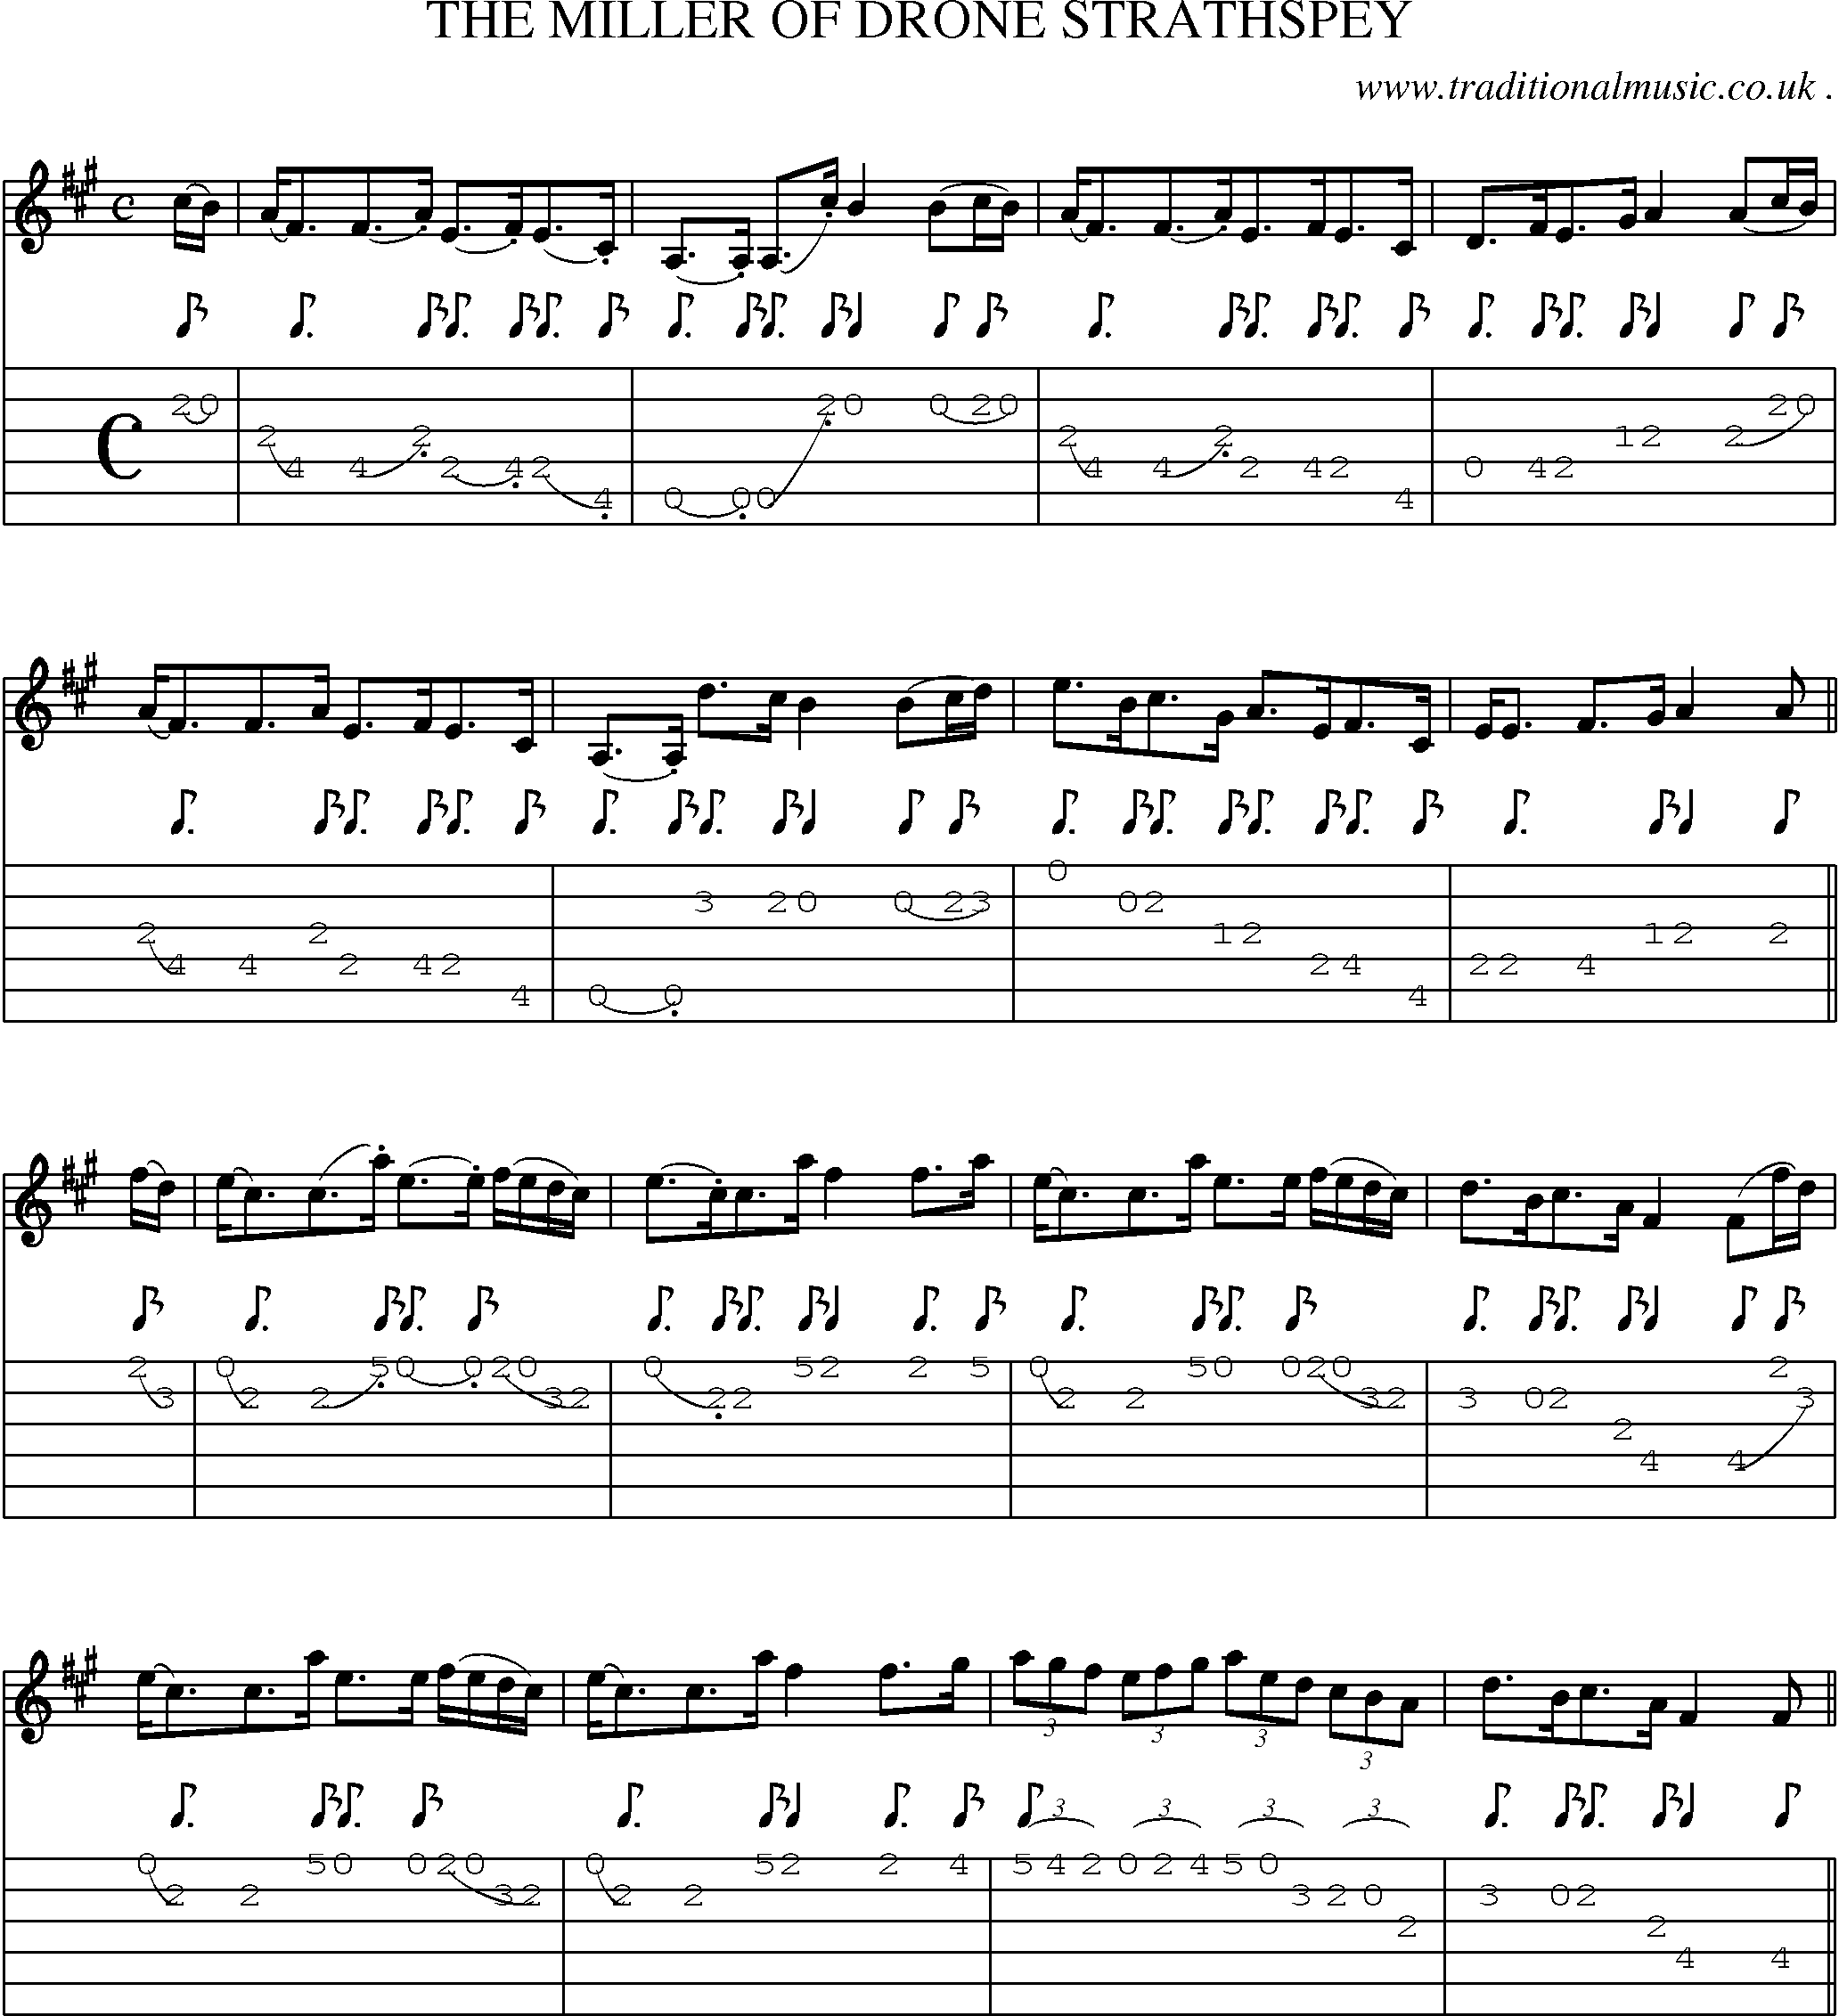 Sheet-Music and Guitar Tabs for The Miller Of Drone Strathspey